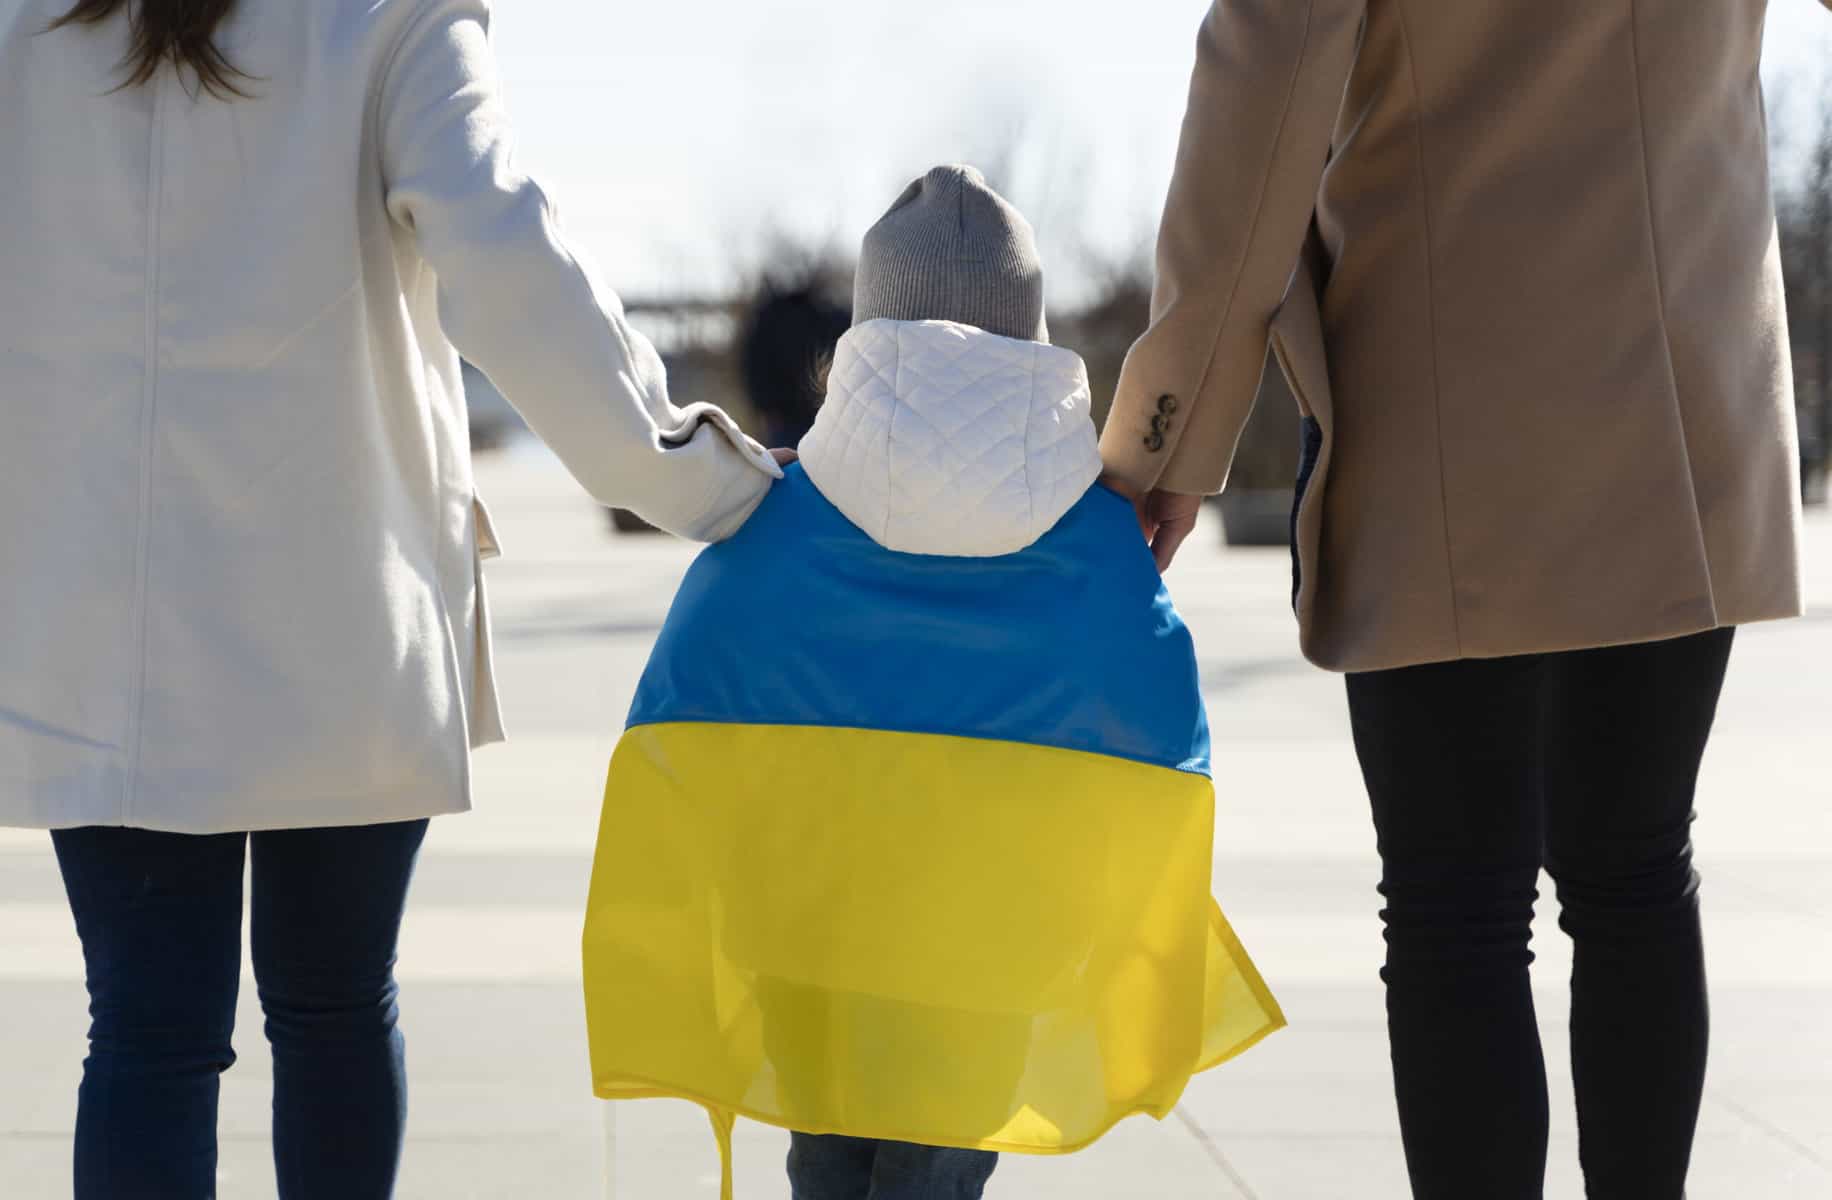 A child walks away from the camera with the flag of Ukraine over their shoulder walks between a man and a woman, holding their hands.